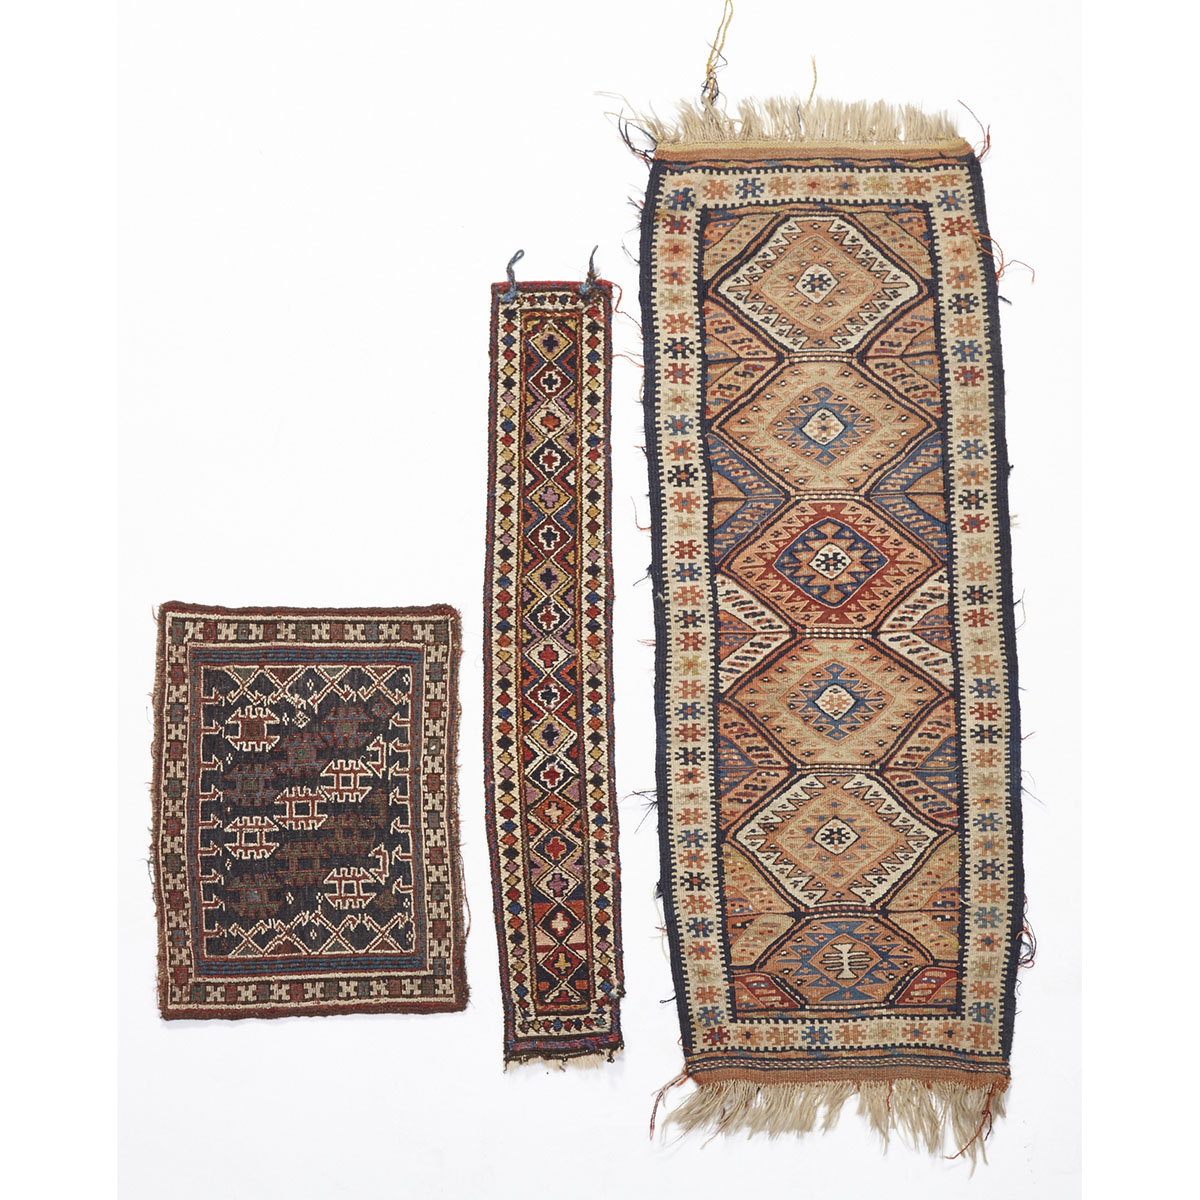 Three Flatwoven Tribal Textiles, early 20th century